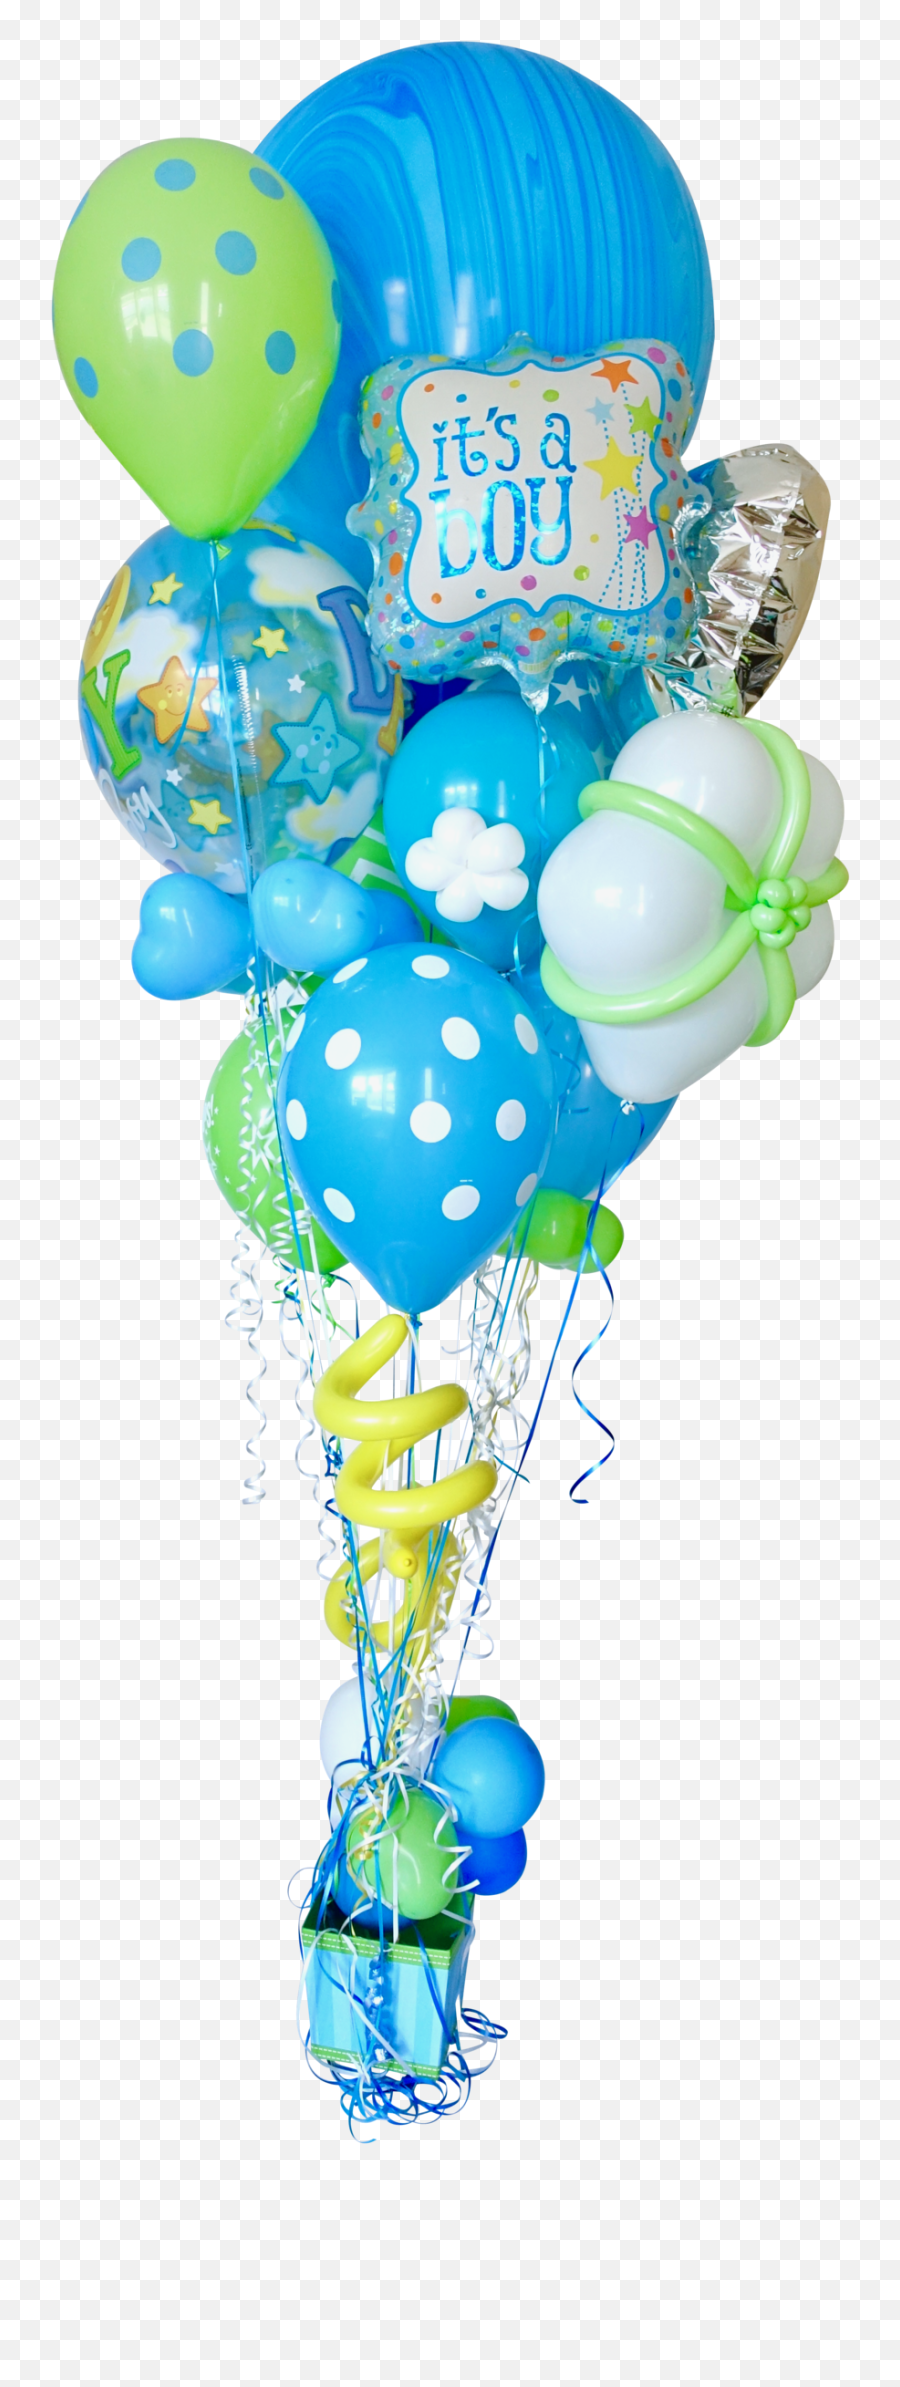 Itu0027s A Boy Png - Itu0027s A Boy Jumbo 5 1333662 Vippng Its A Boy Ballons No Background,Its A Boy Png